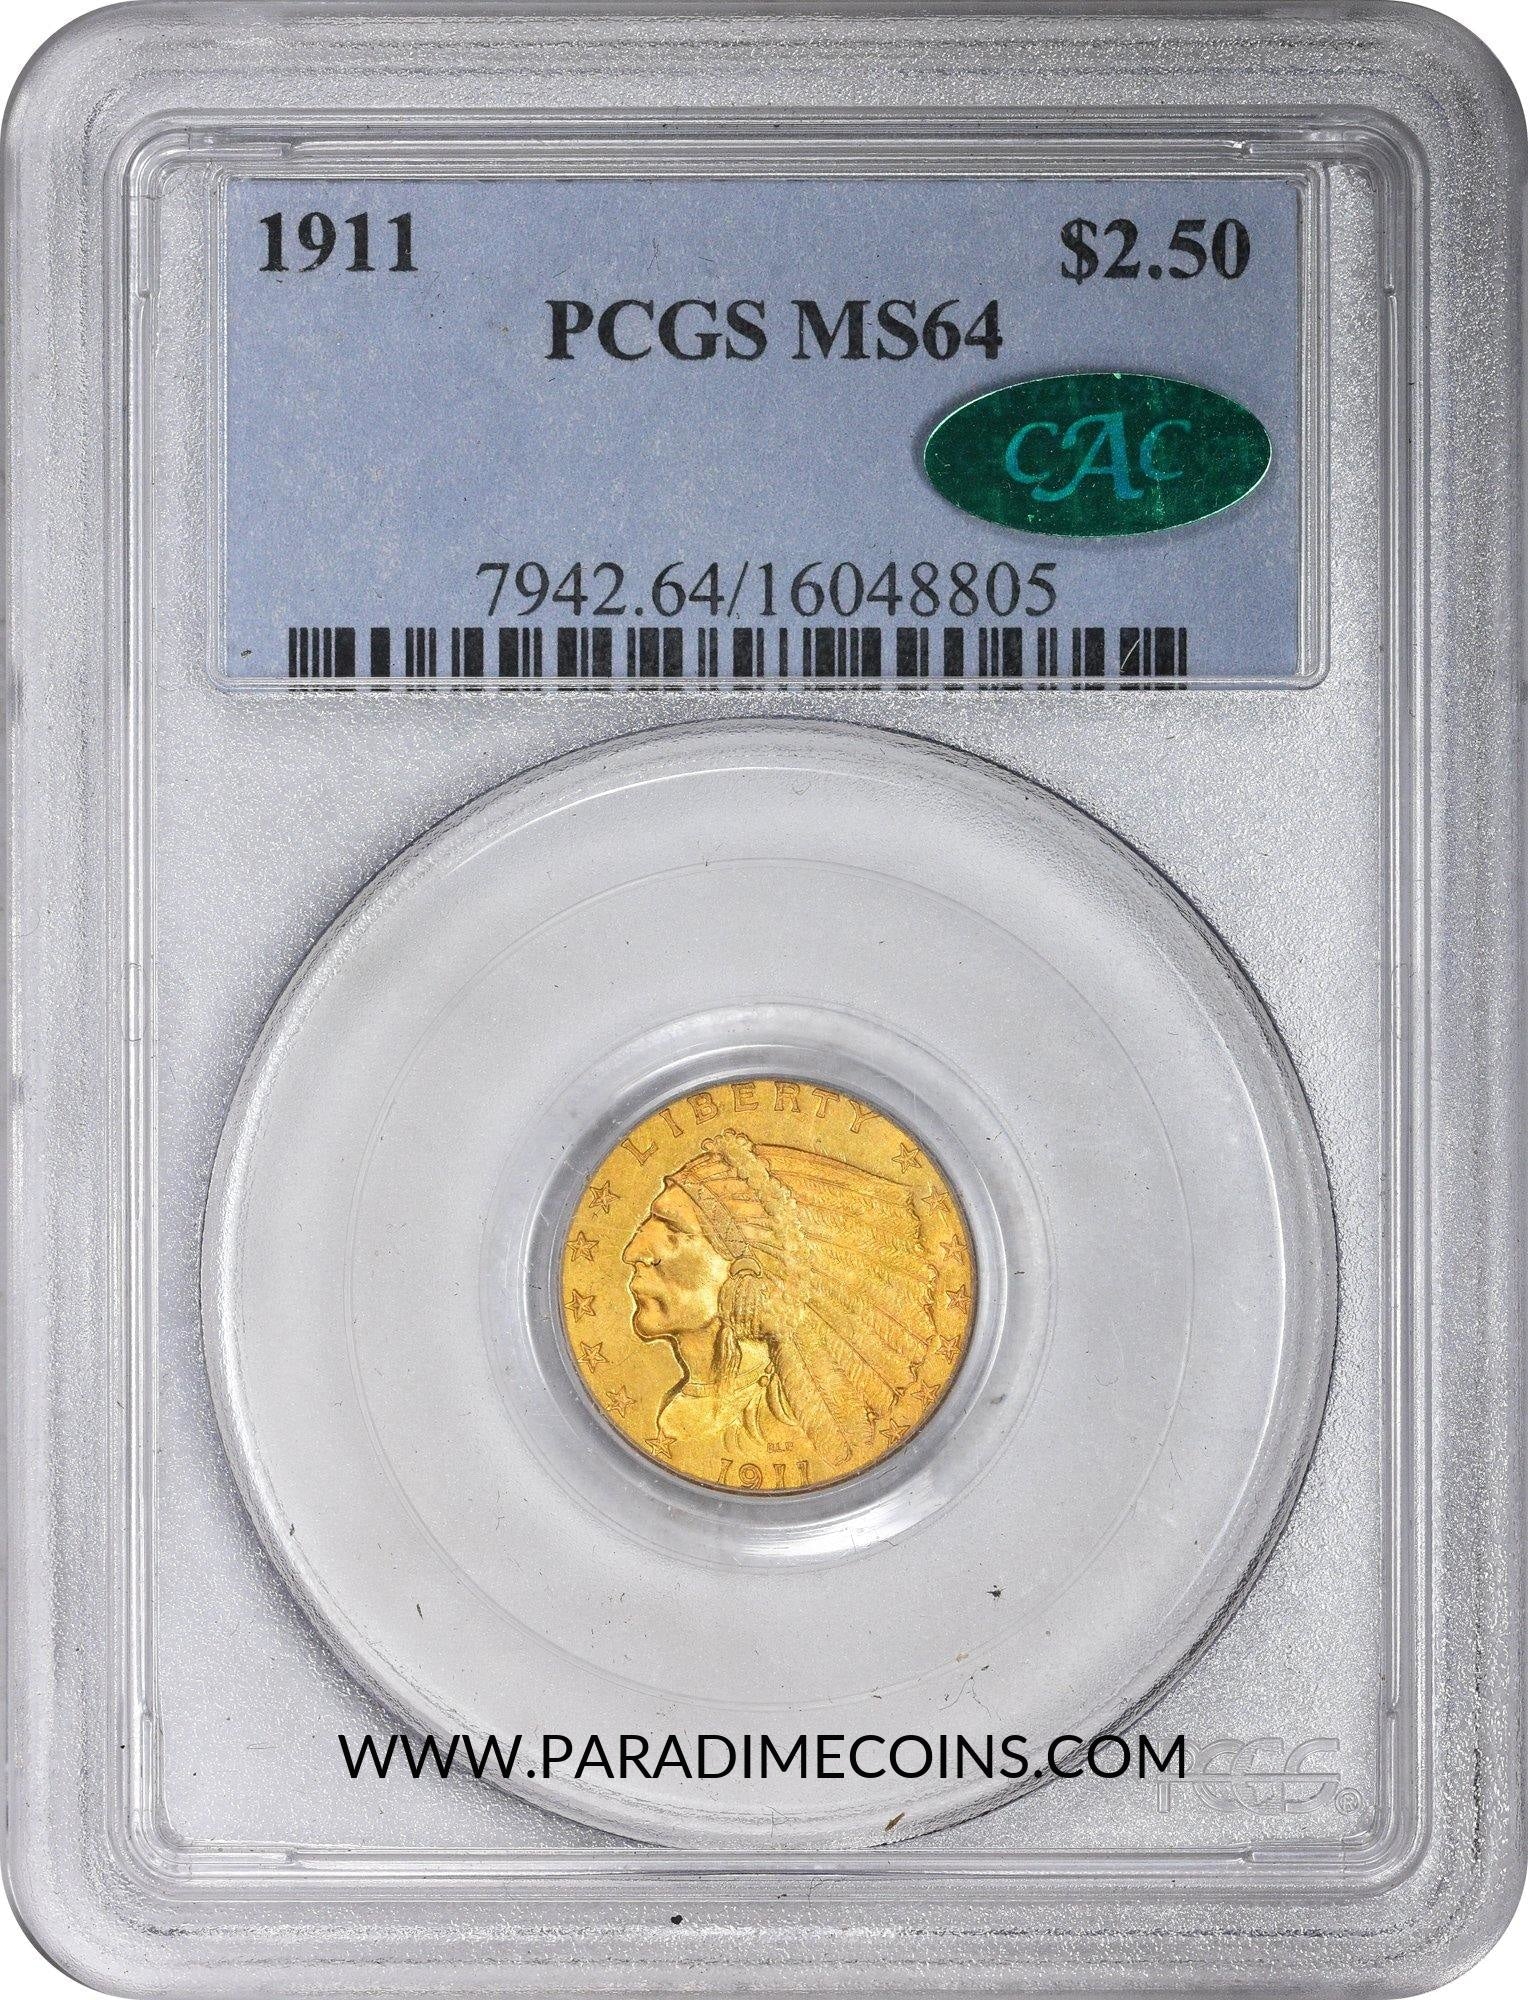 1911 $2.5 MS64 PCGS CAC - Paradime Coins | PCGS NGC CACG CAC Rare US Numismatic Coins For Sale